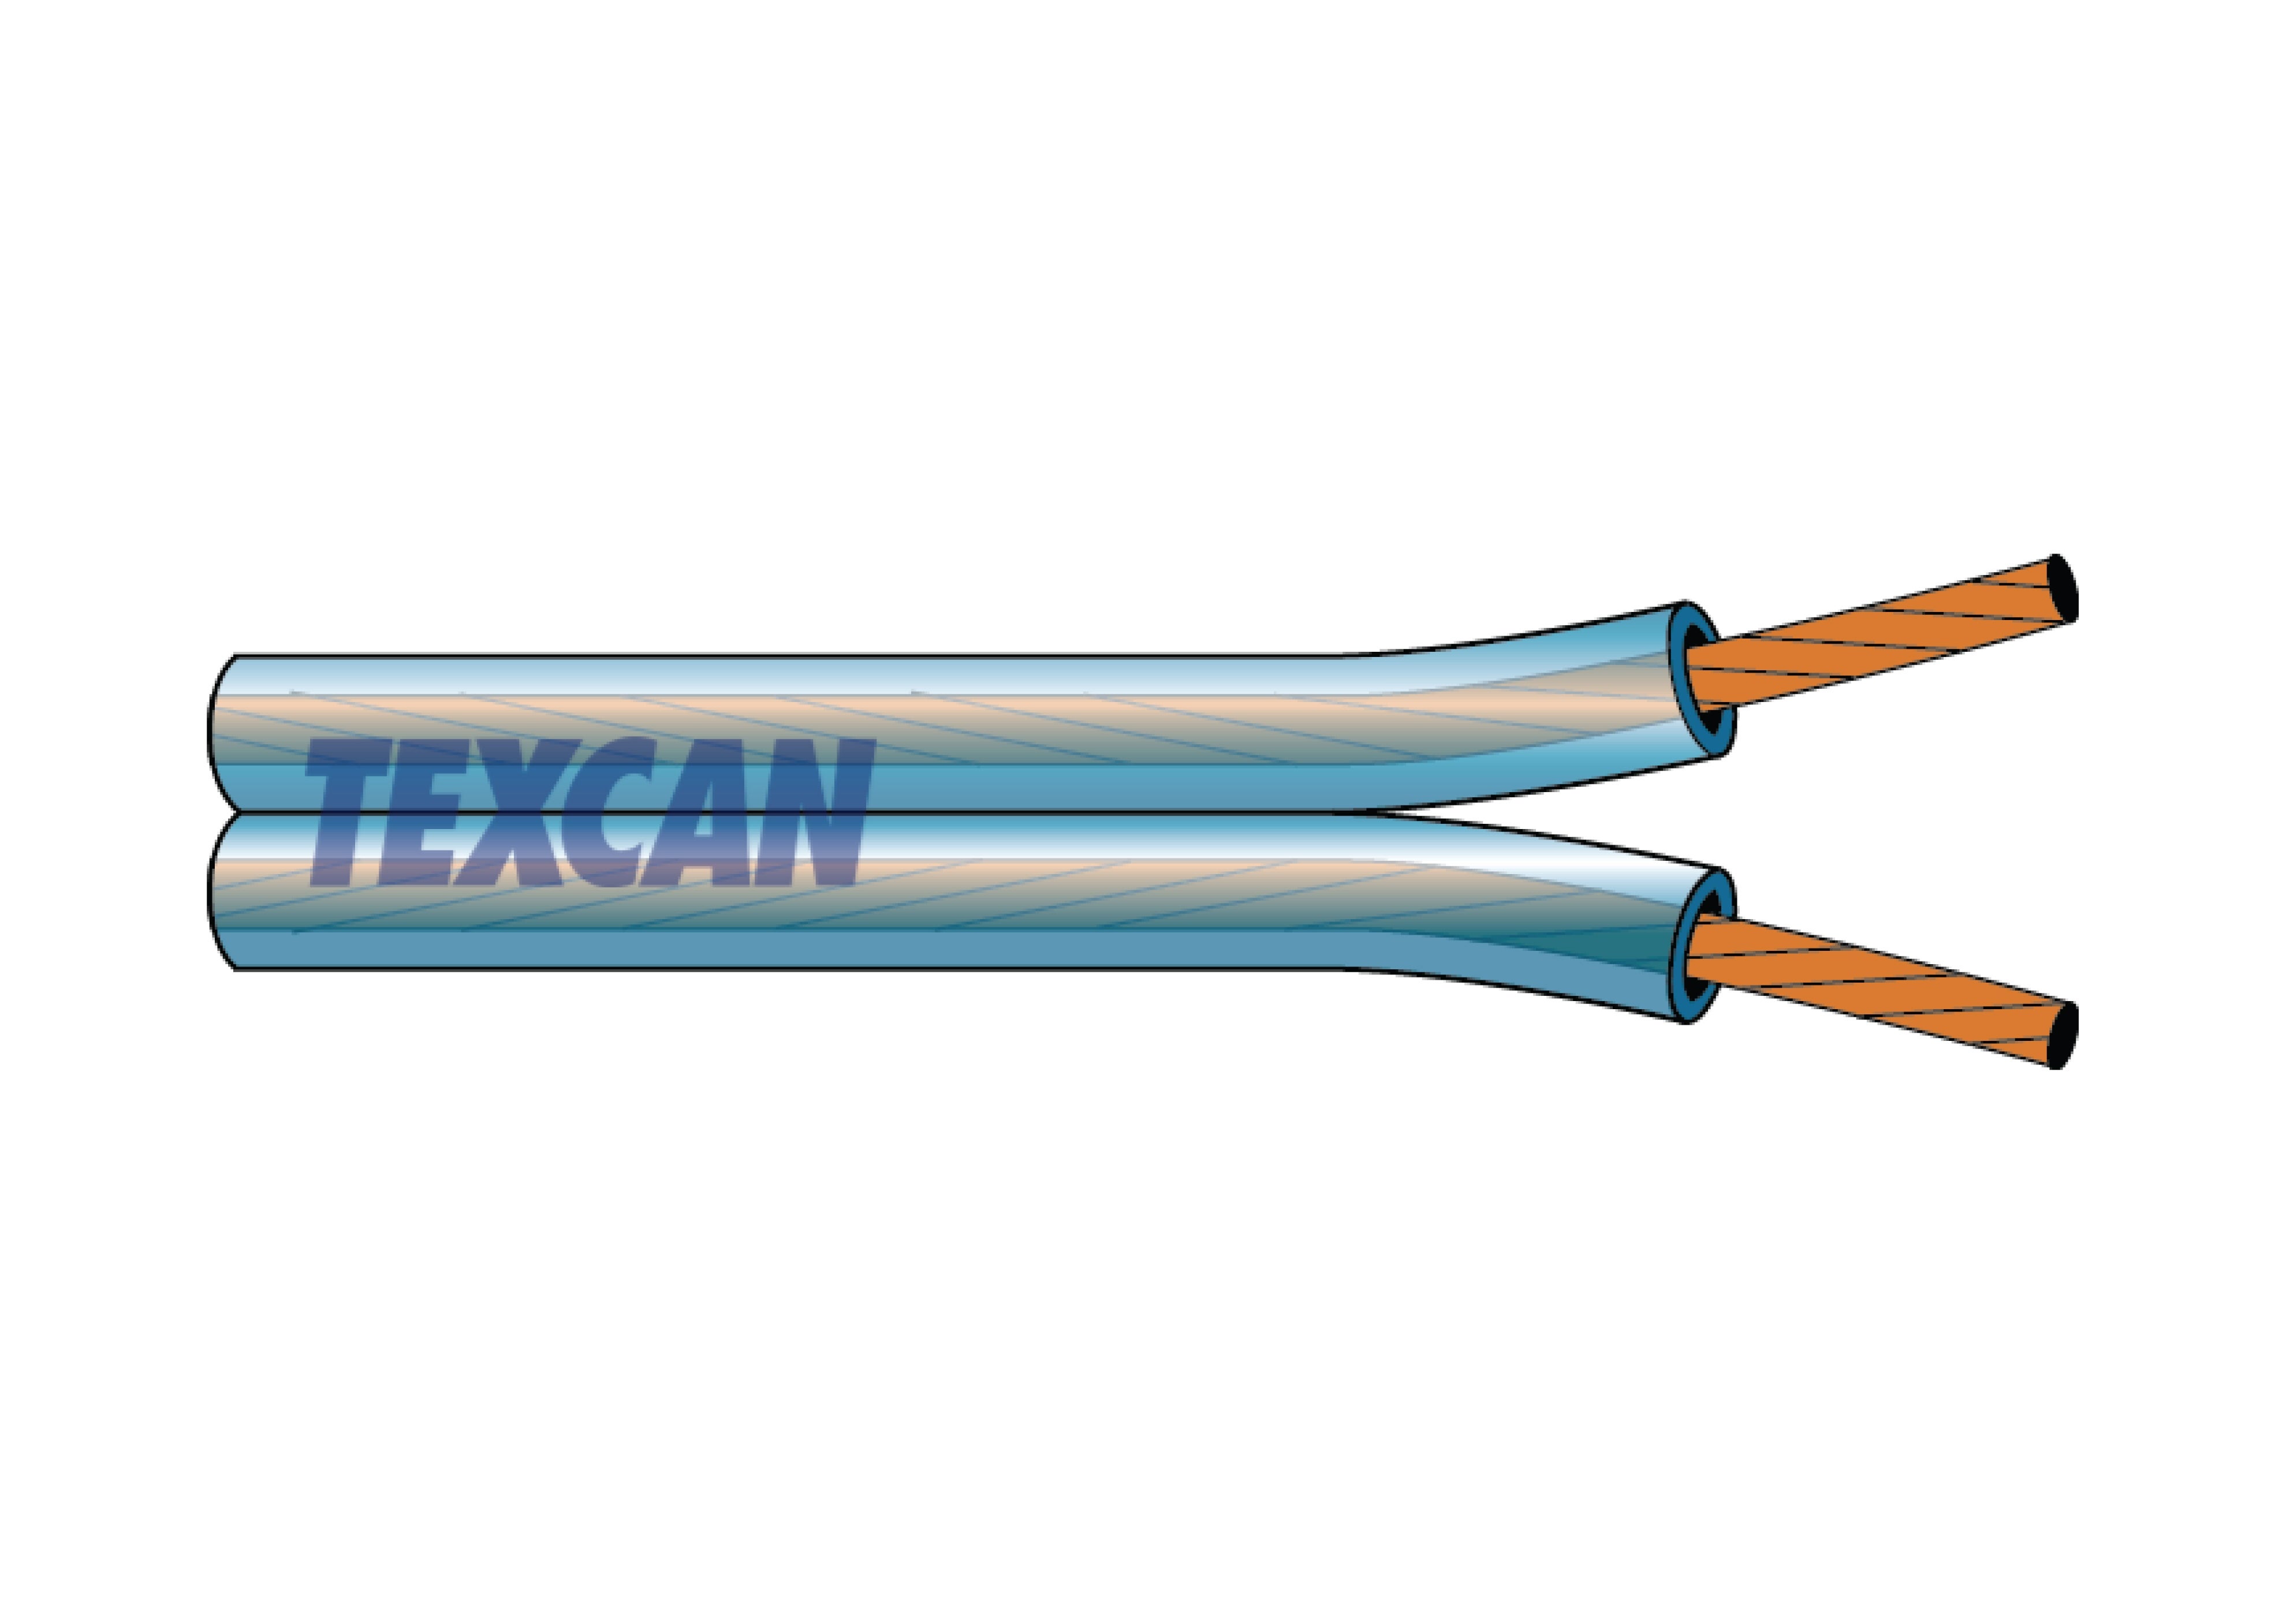 Texcan - Landing Pages - Belden Products - Component & High Temp Wire.jpg